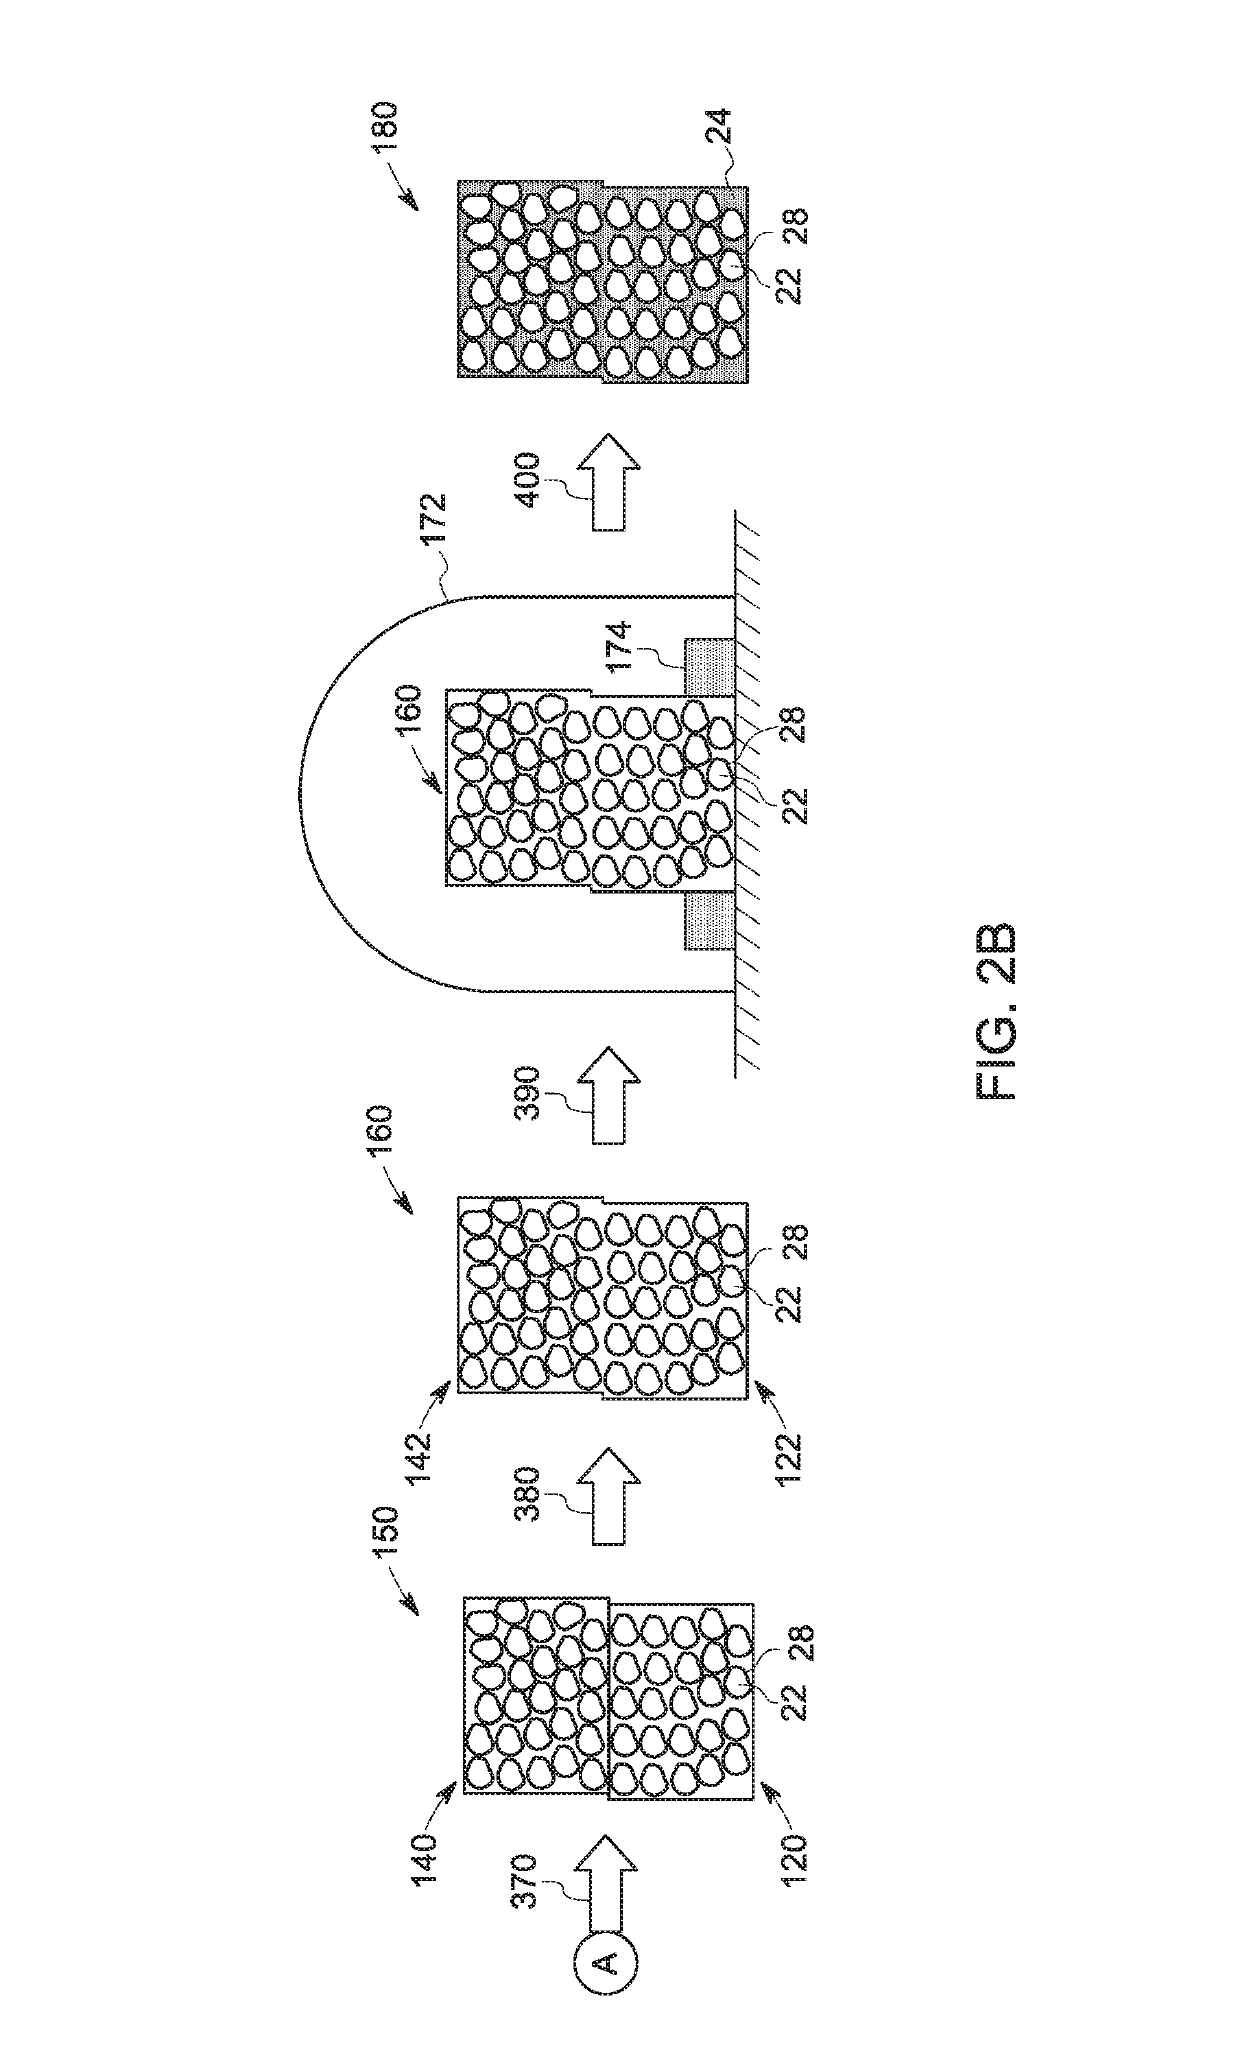 Backing component in ultrasound probe